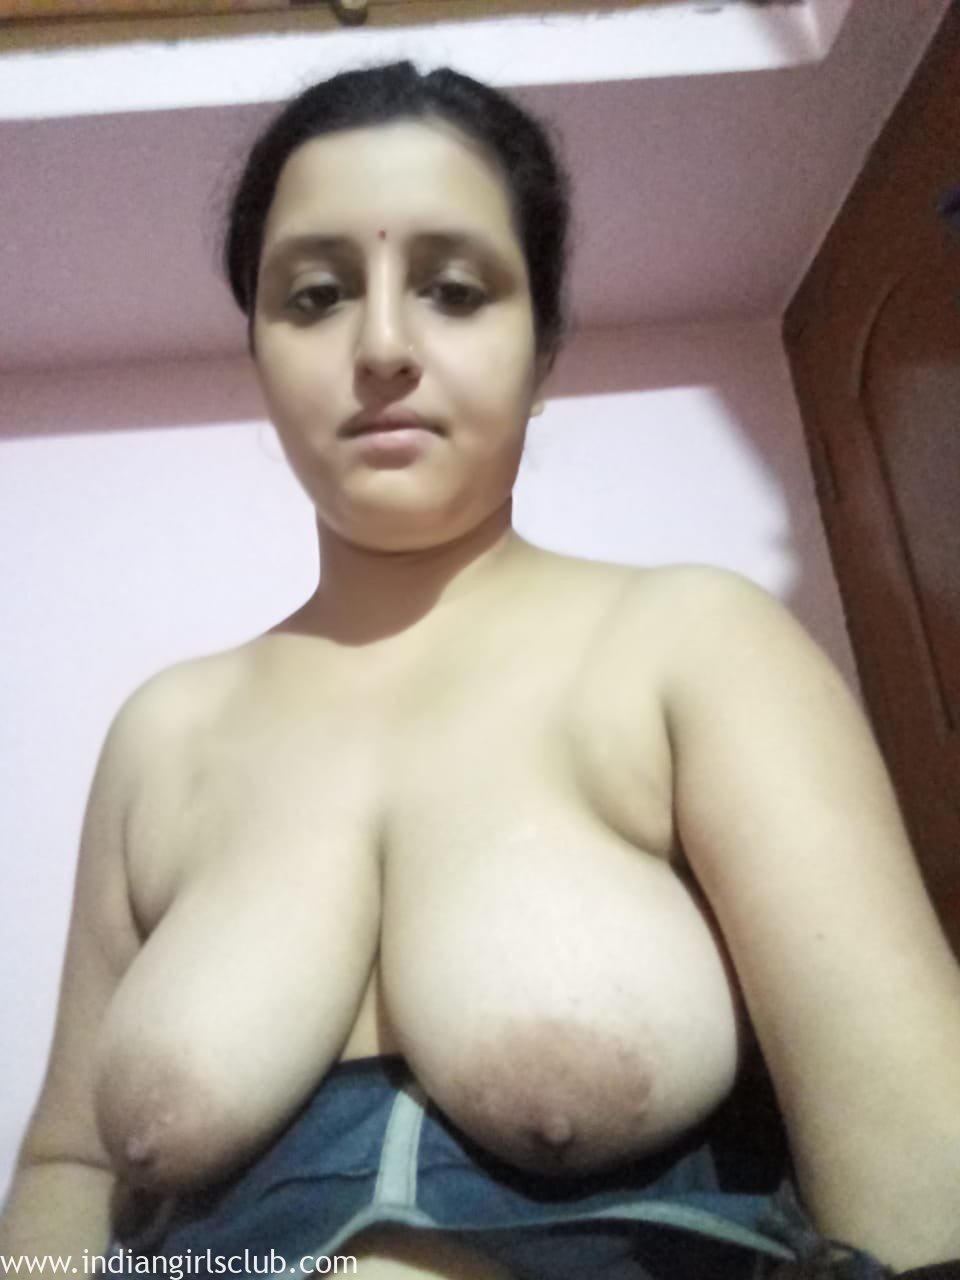 big-tits-bengali-indian-housewife-ready-for-hot-sex-3 - Indian Girls Club